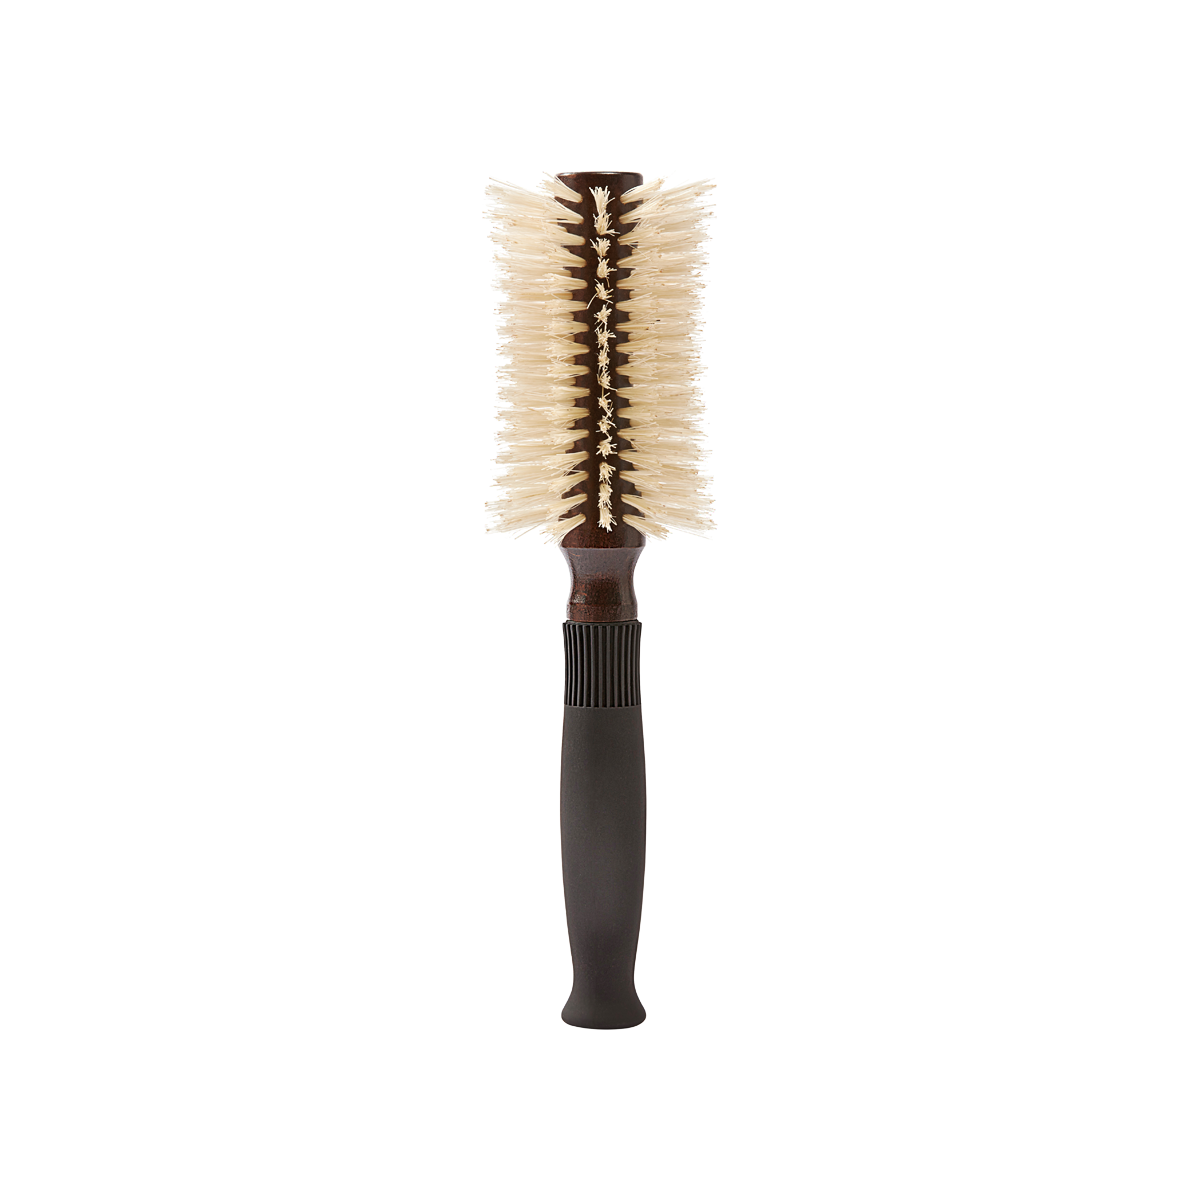 Christophe Robin - Pre-Curved Blowdry Hairbrush